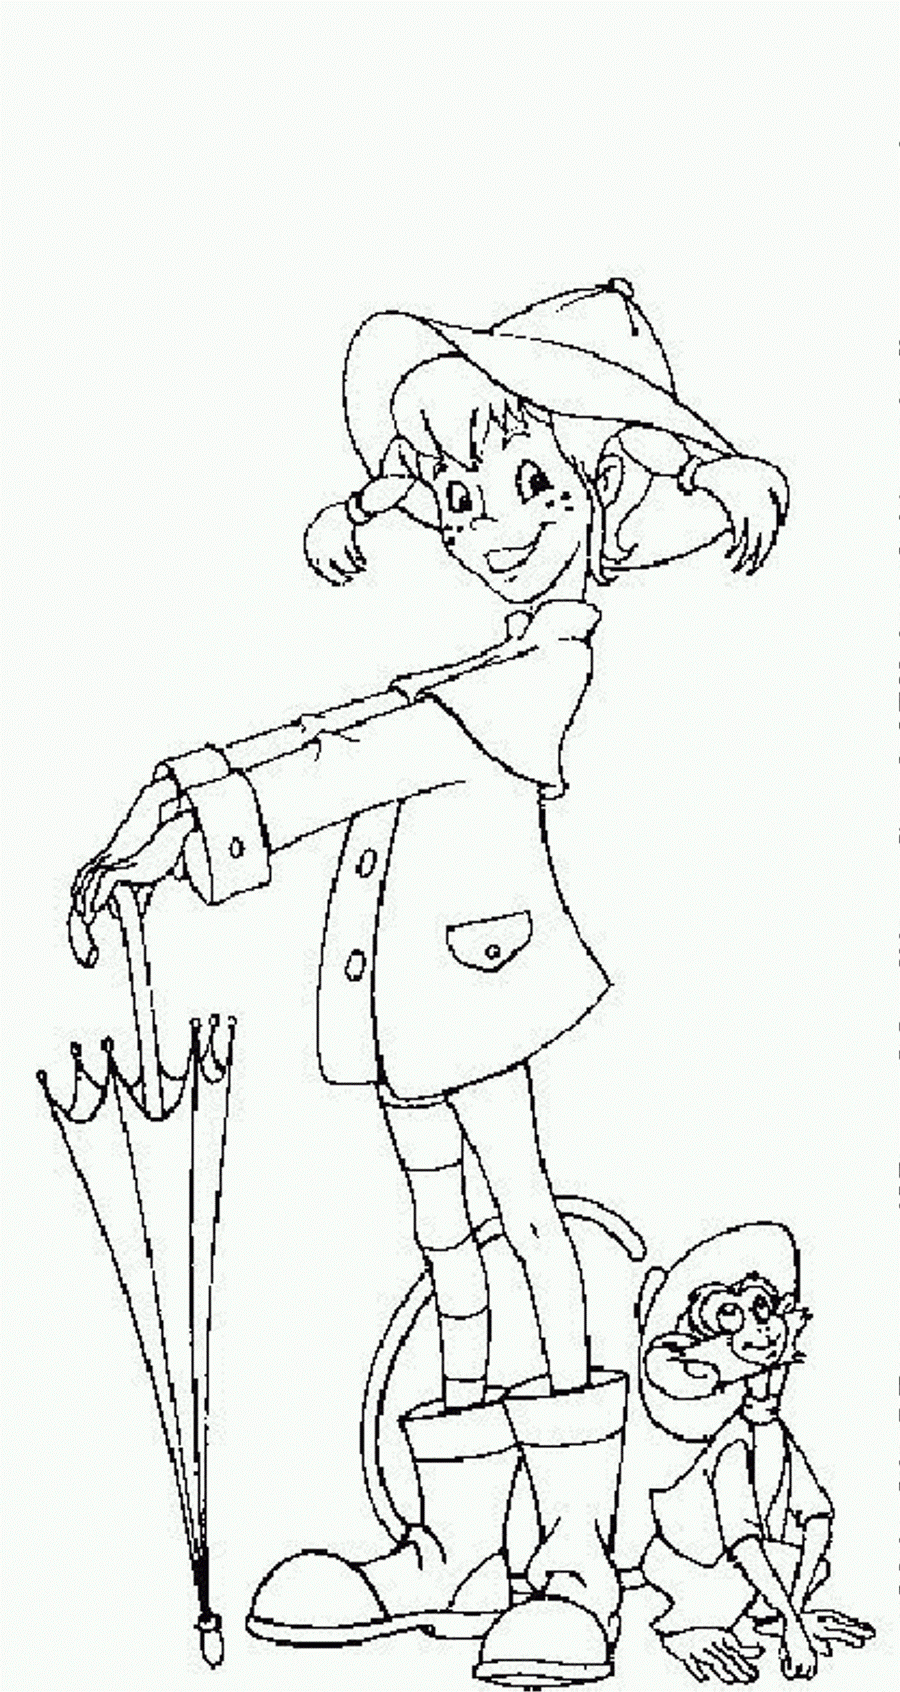 Pippi Longstocking Free Printable Coloring Pages No 5 ganzes Pippi